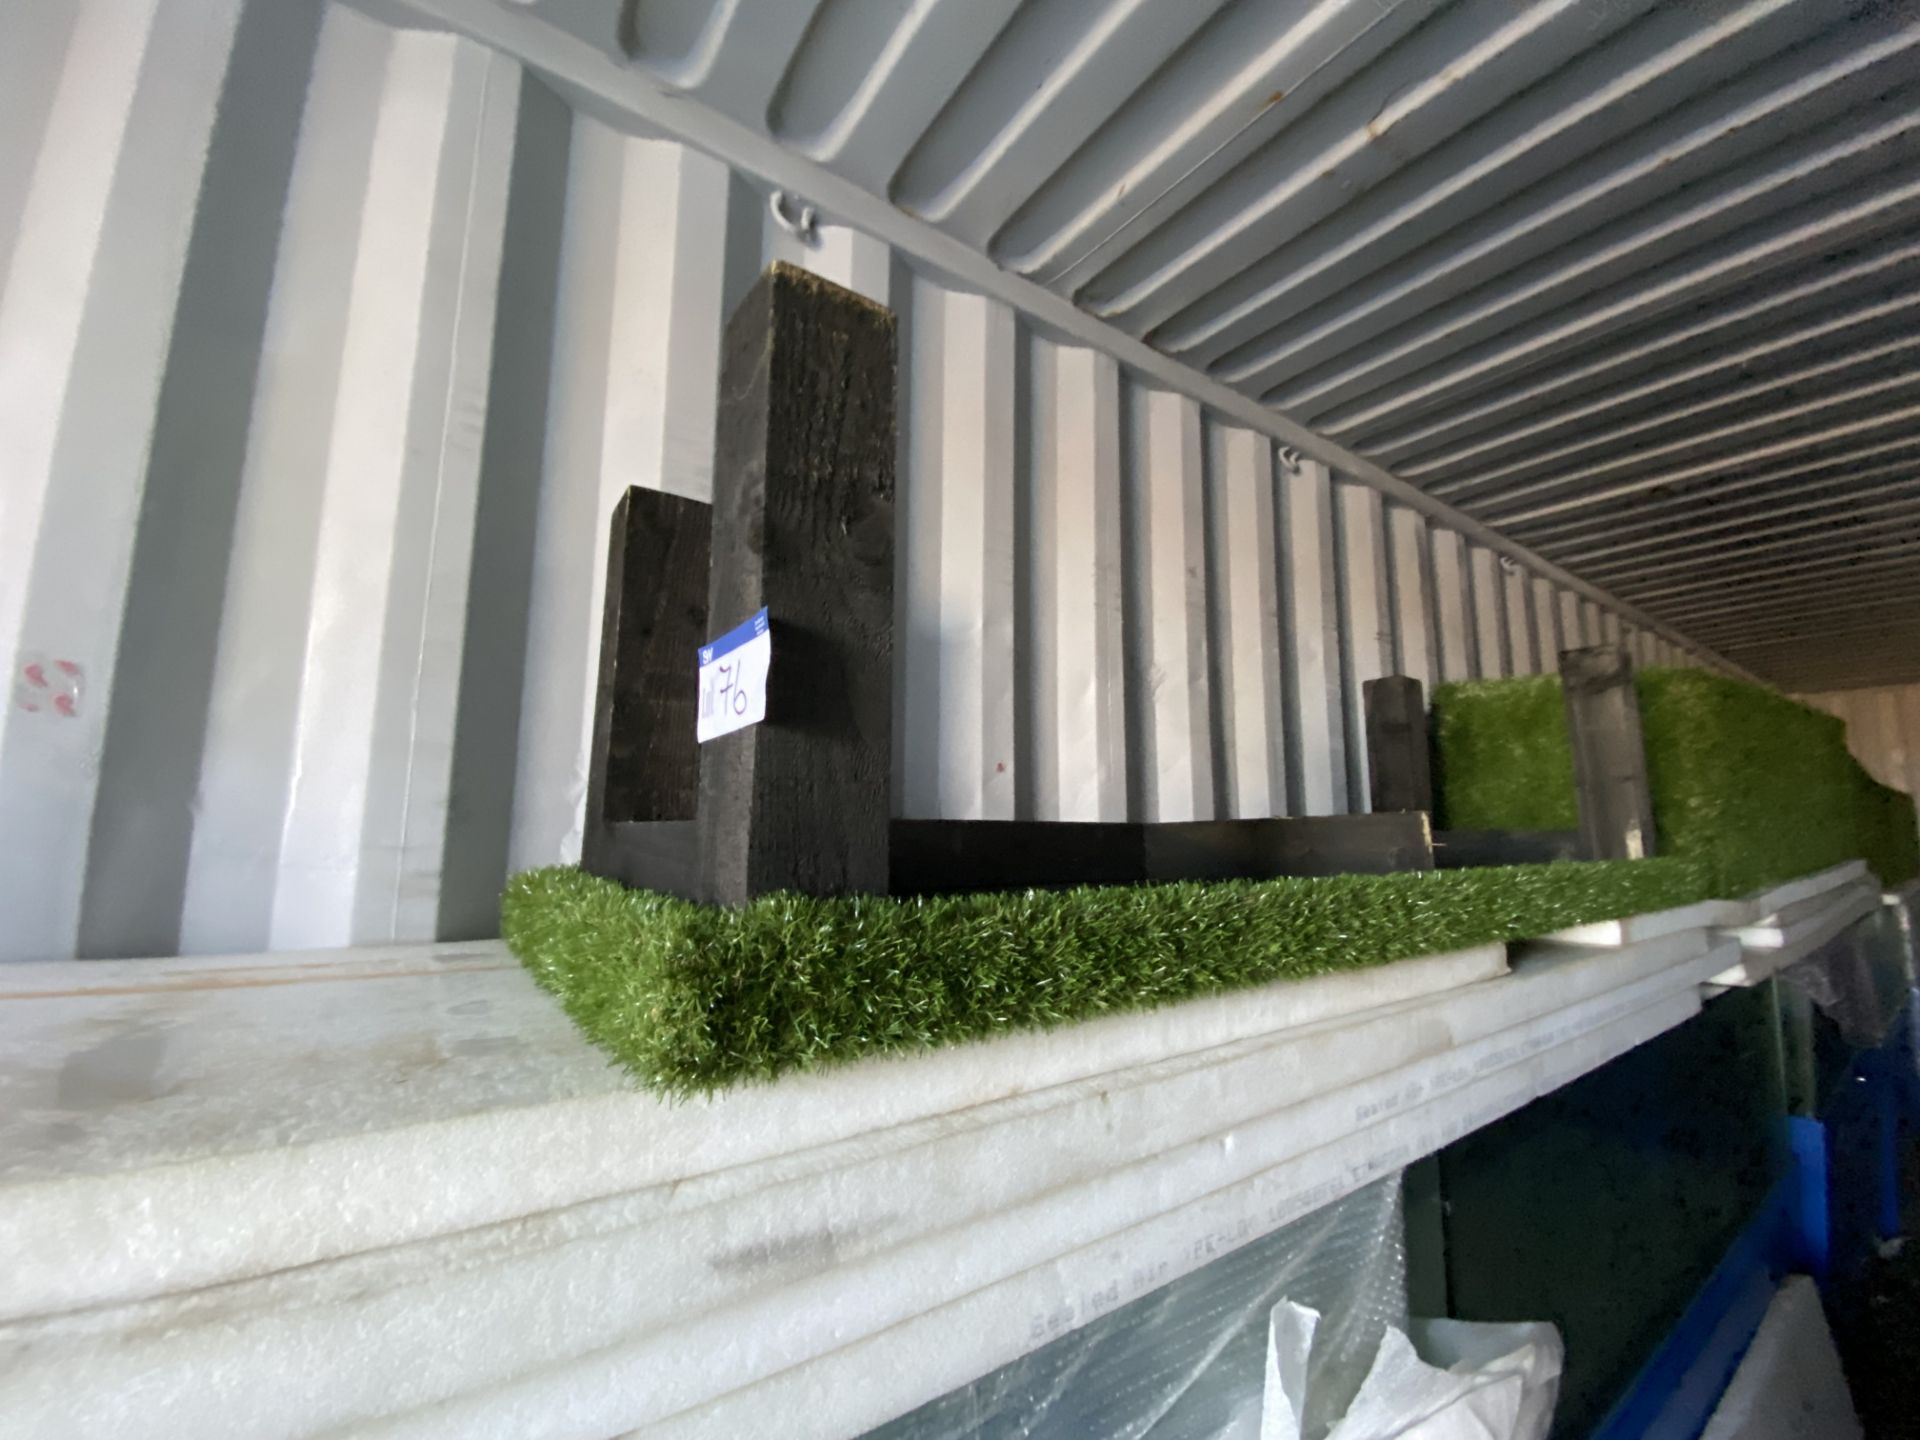 Two Artificial Grass Benches approx. 2m x 650mm x - Image 3 of 3